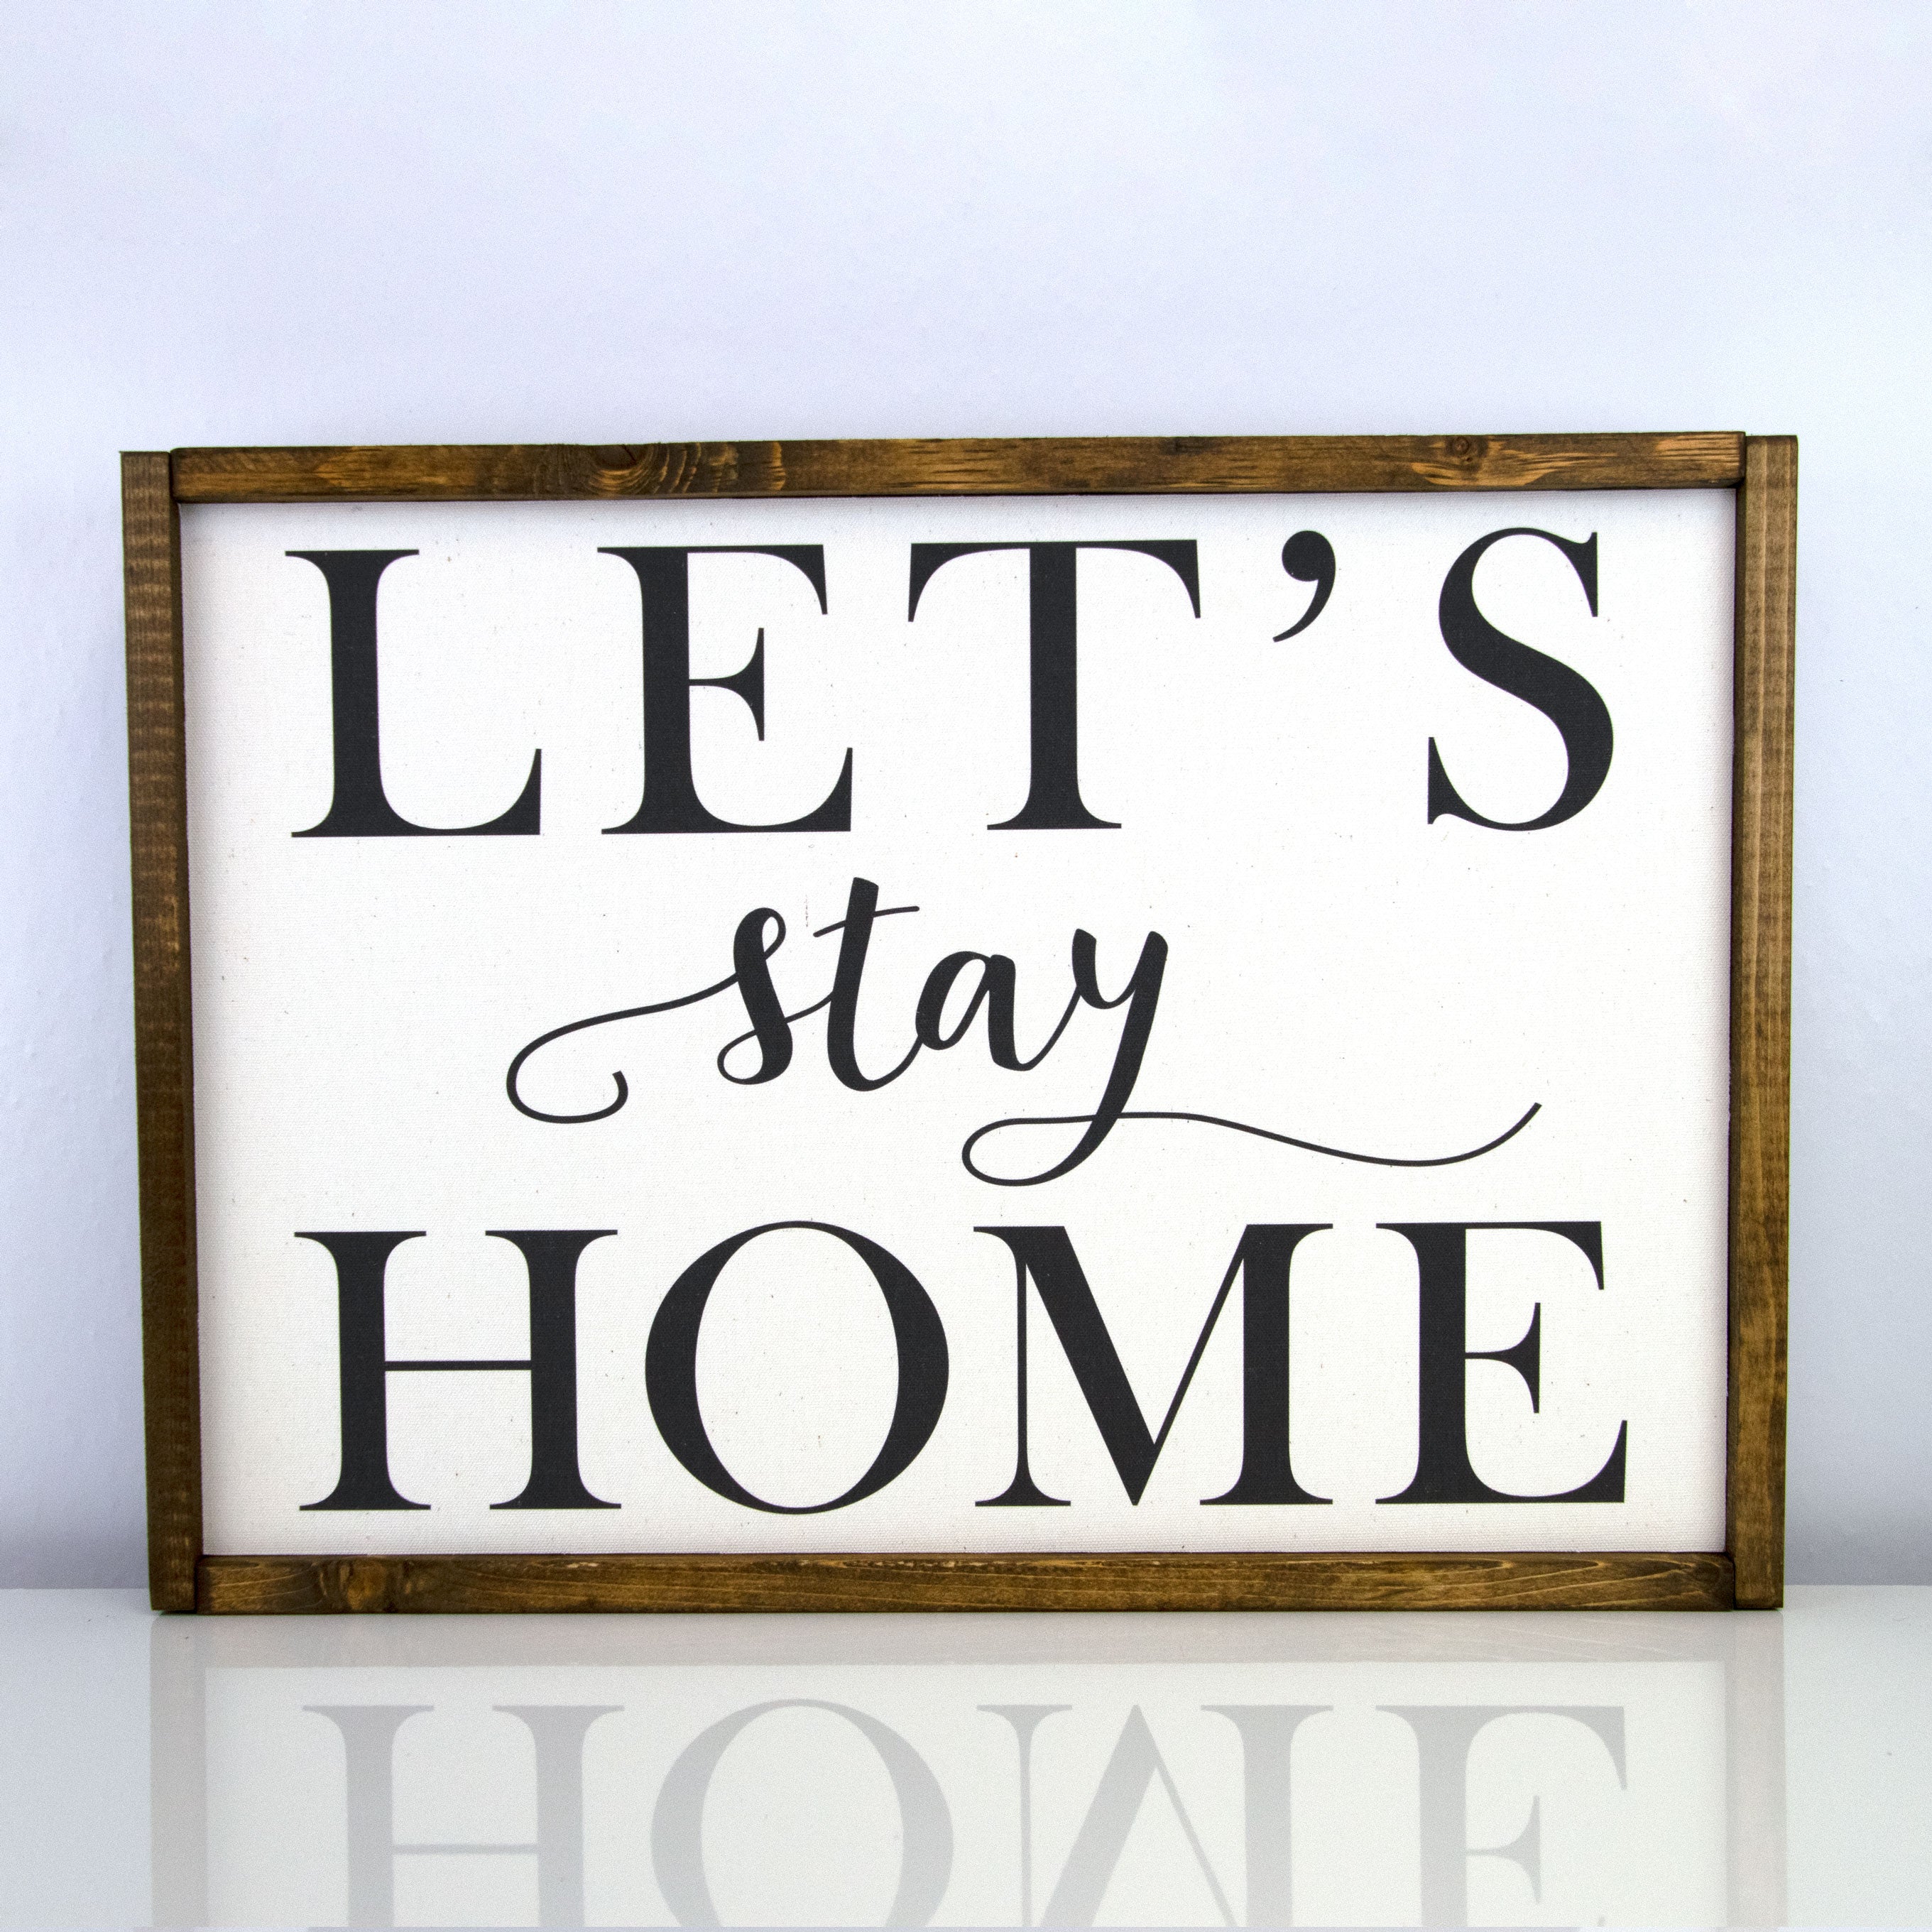 Let's Stay Home | 14 x 20 Classic